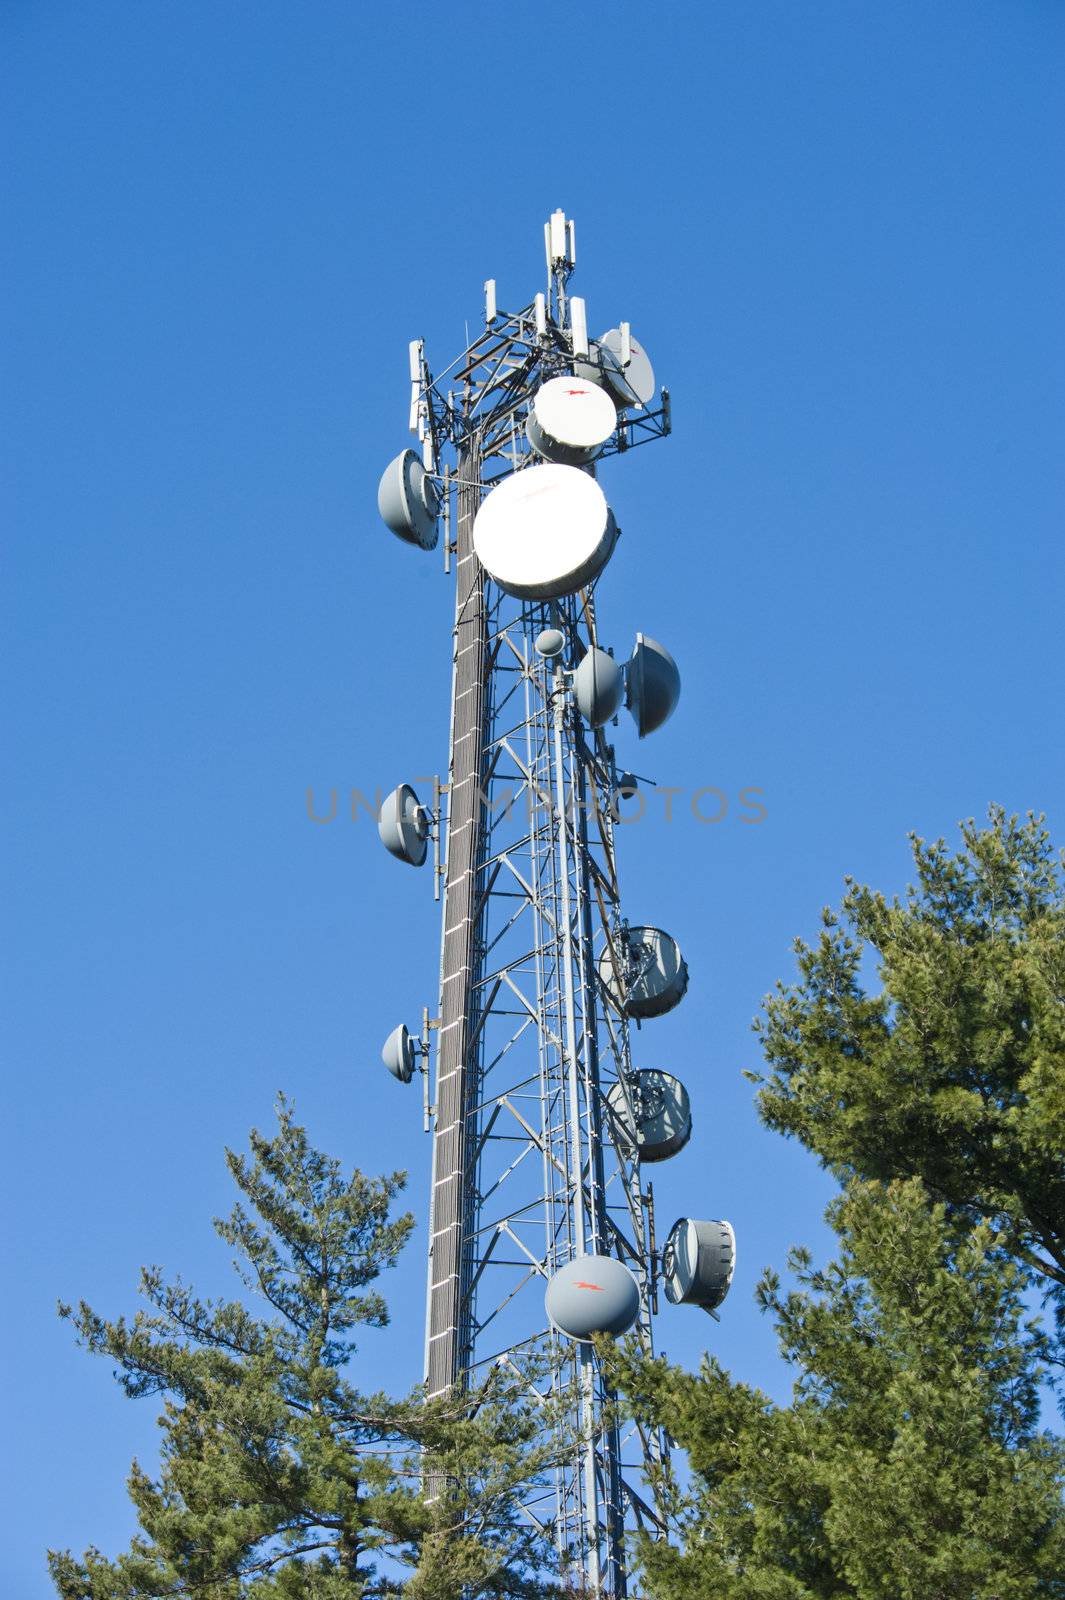 Cell tower and radio antenna in trees against a blue sky